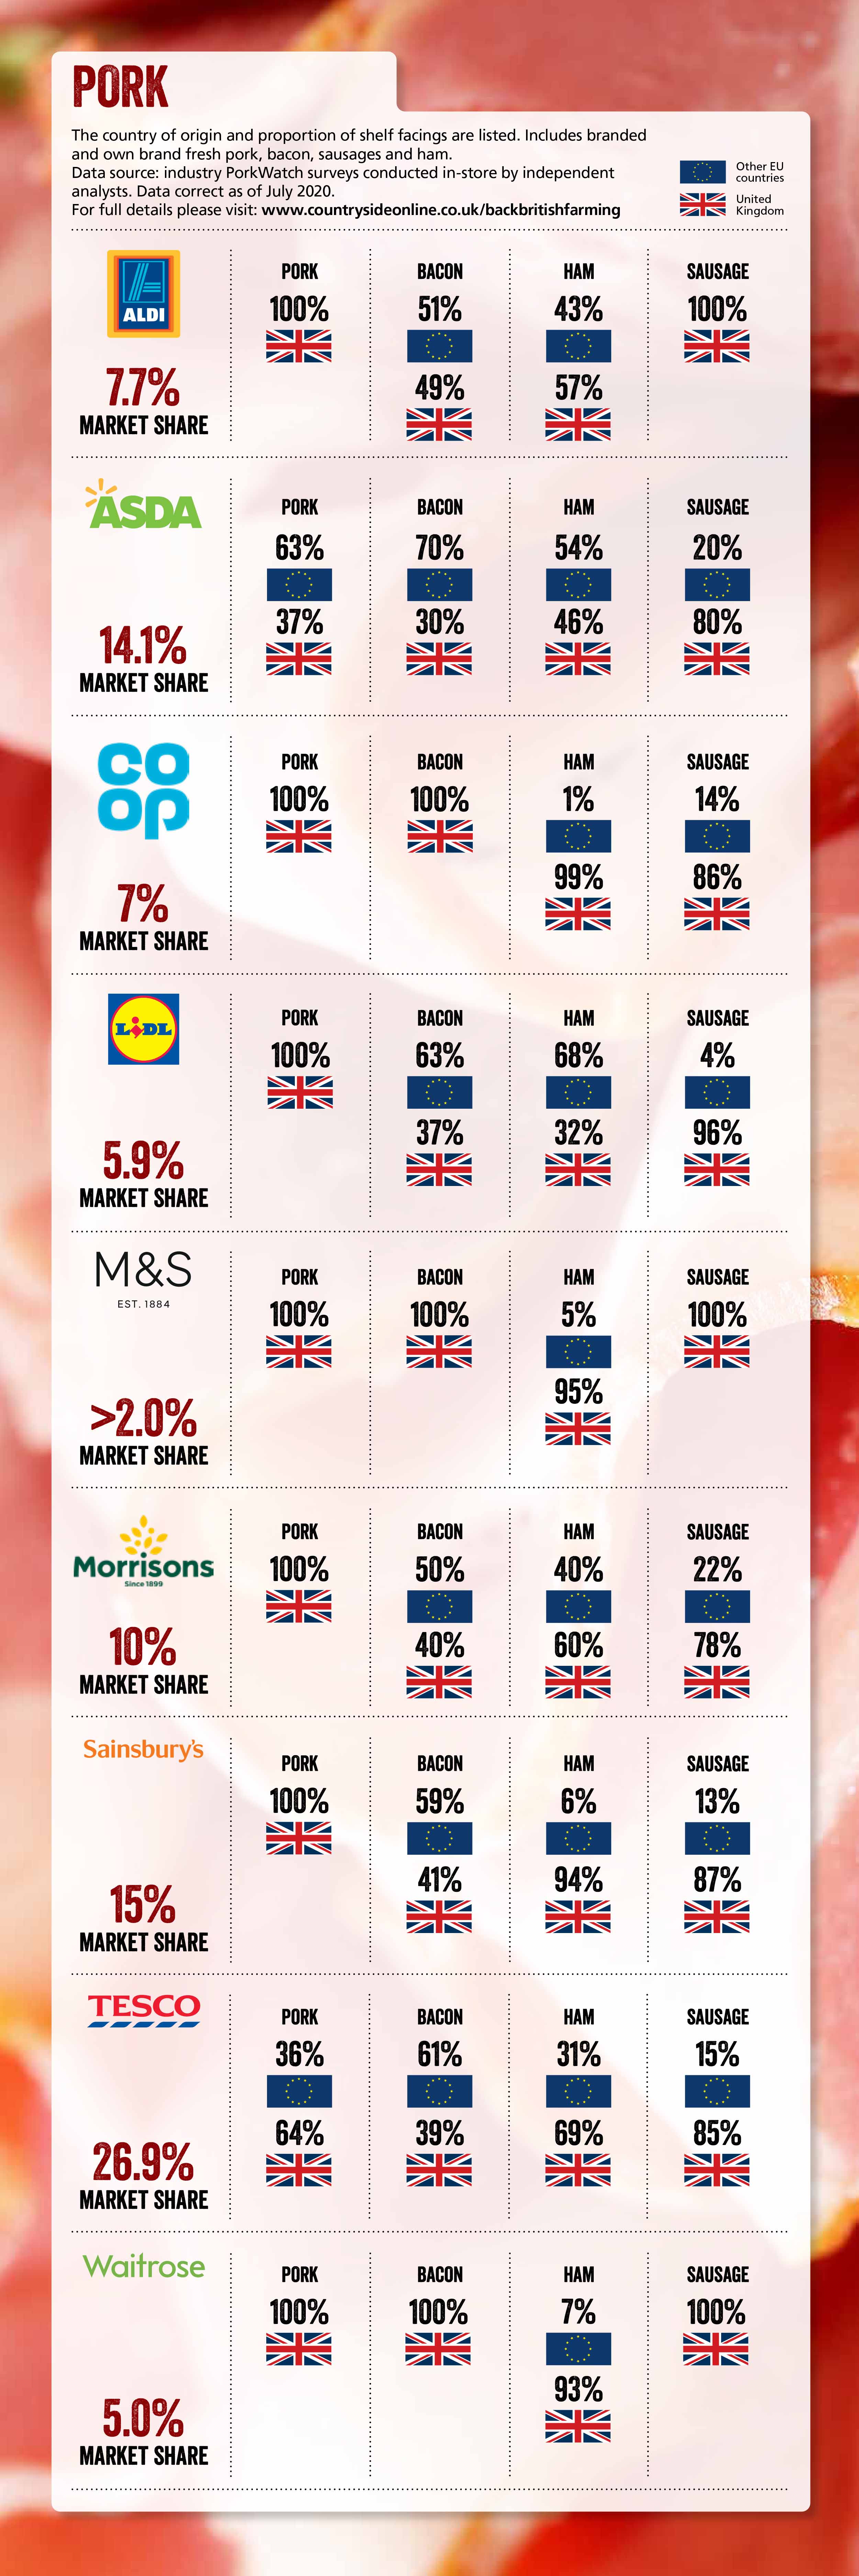 Table to indicate sourcing policies of main supermarkets in the pork sector